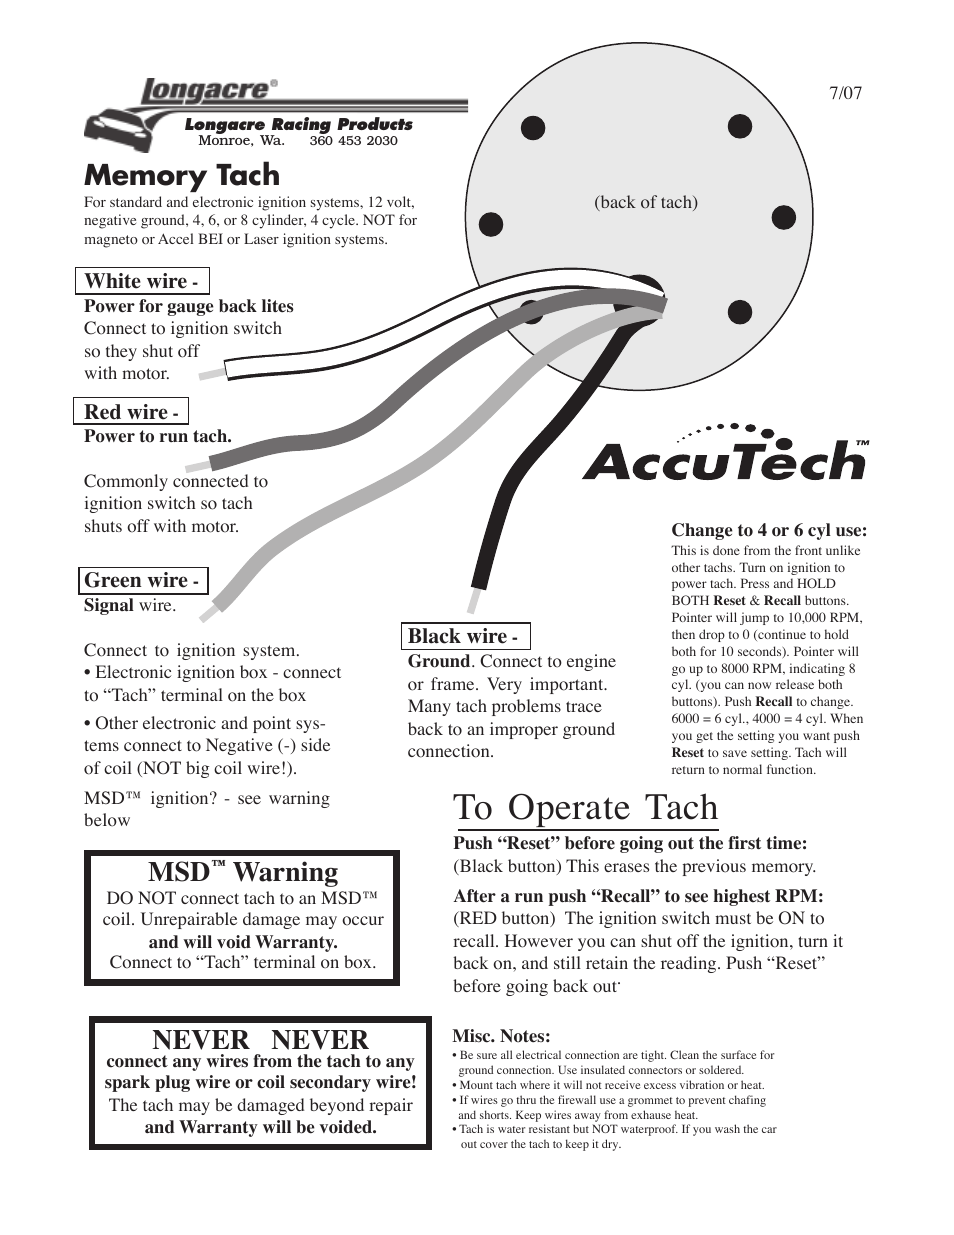 AccuTech Tach Installation and Operation